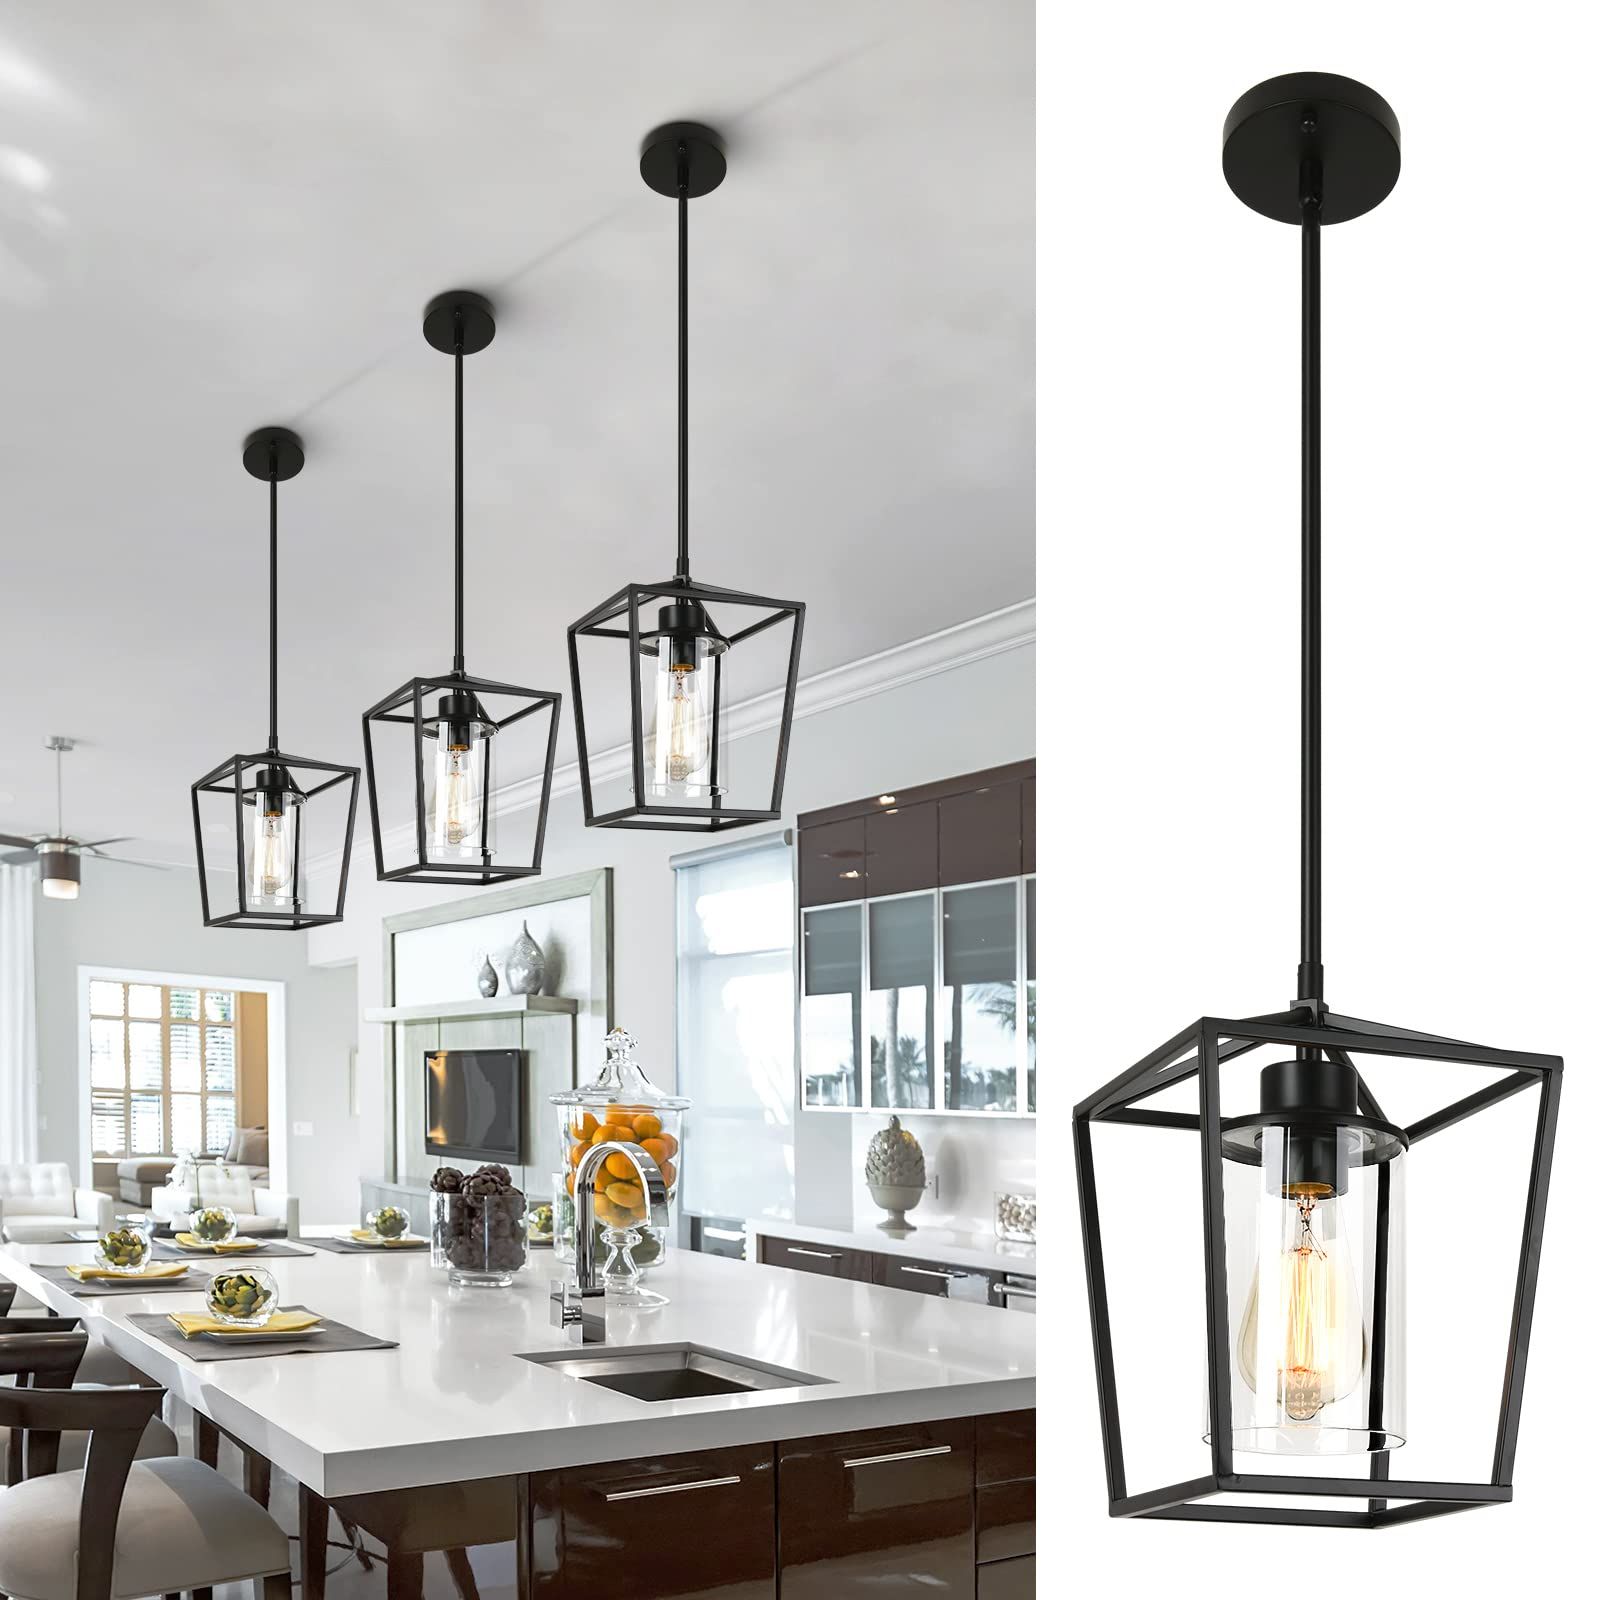 Most Recent 1 Light Black Pendant Light Fixture Farmhouse Iron Cage Metal Pendant Light  Lantern Hanging Light Fixtures With Clear Glass Shade For Kitchen Island,  Entryway, Dining Room, Hallway – – Amazon Within Transparent Glass Lantern Chandeliers (View 8 of 10)